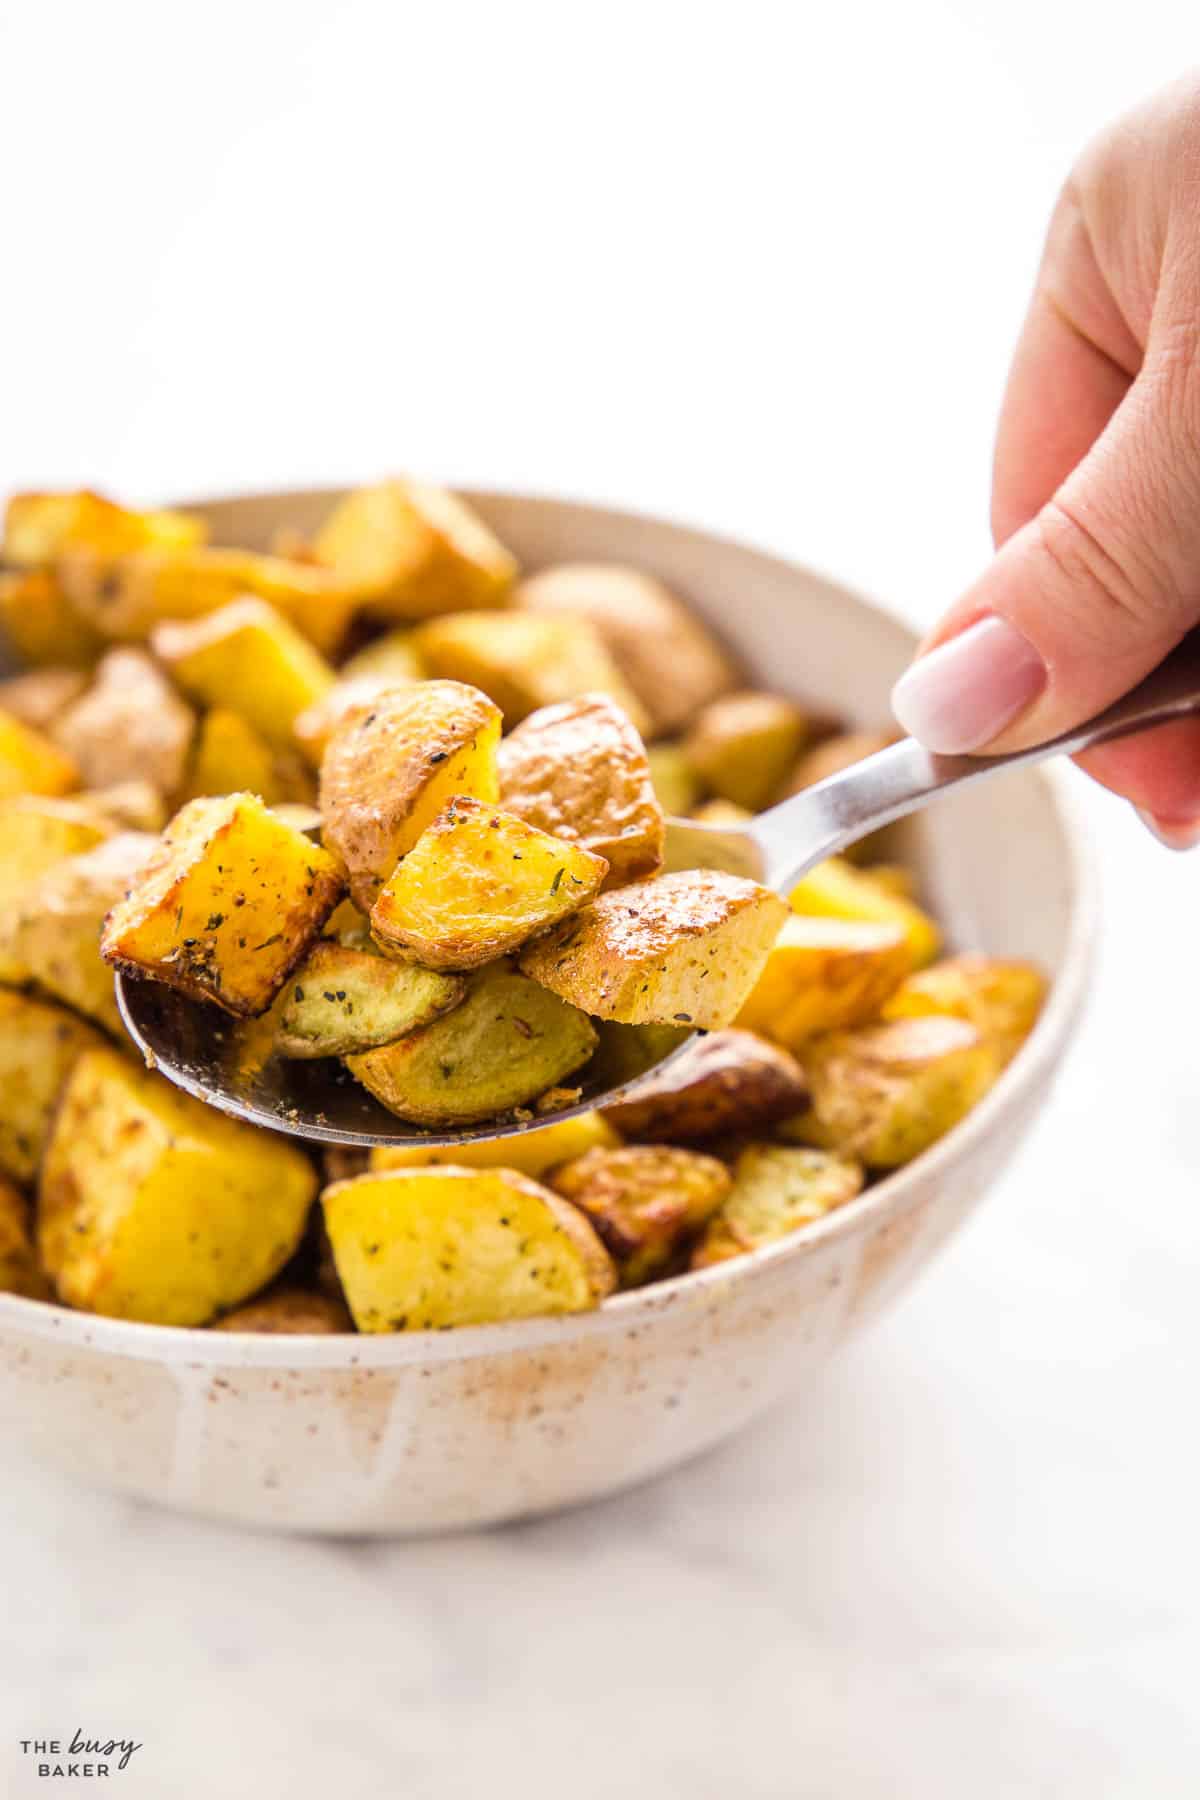 hand holding a spoon serving roasted potatoes